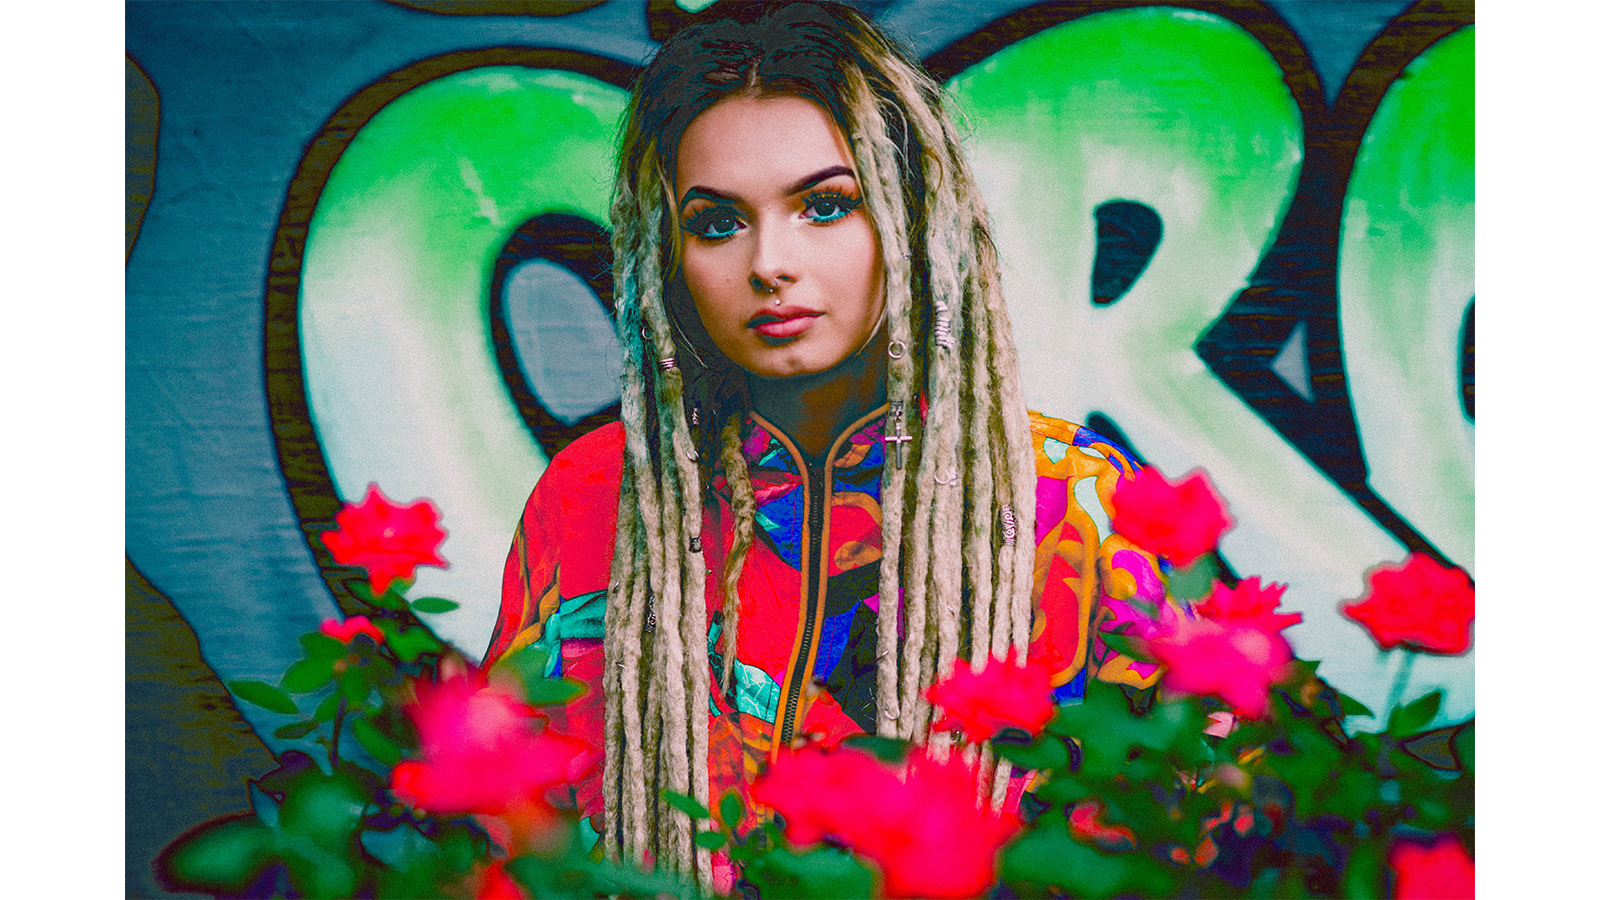 Zhavia signed to Columbia Records and collabed with French Montana